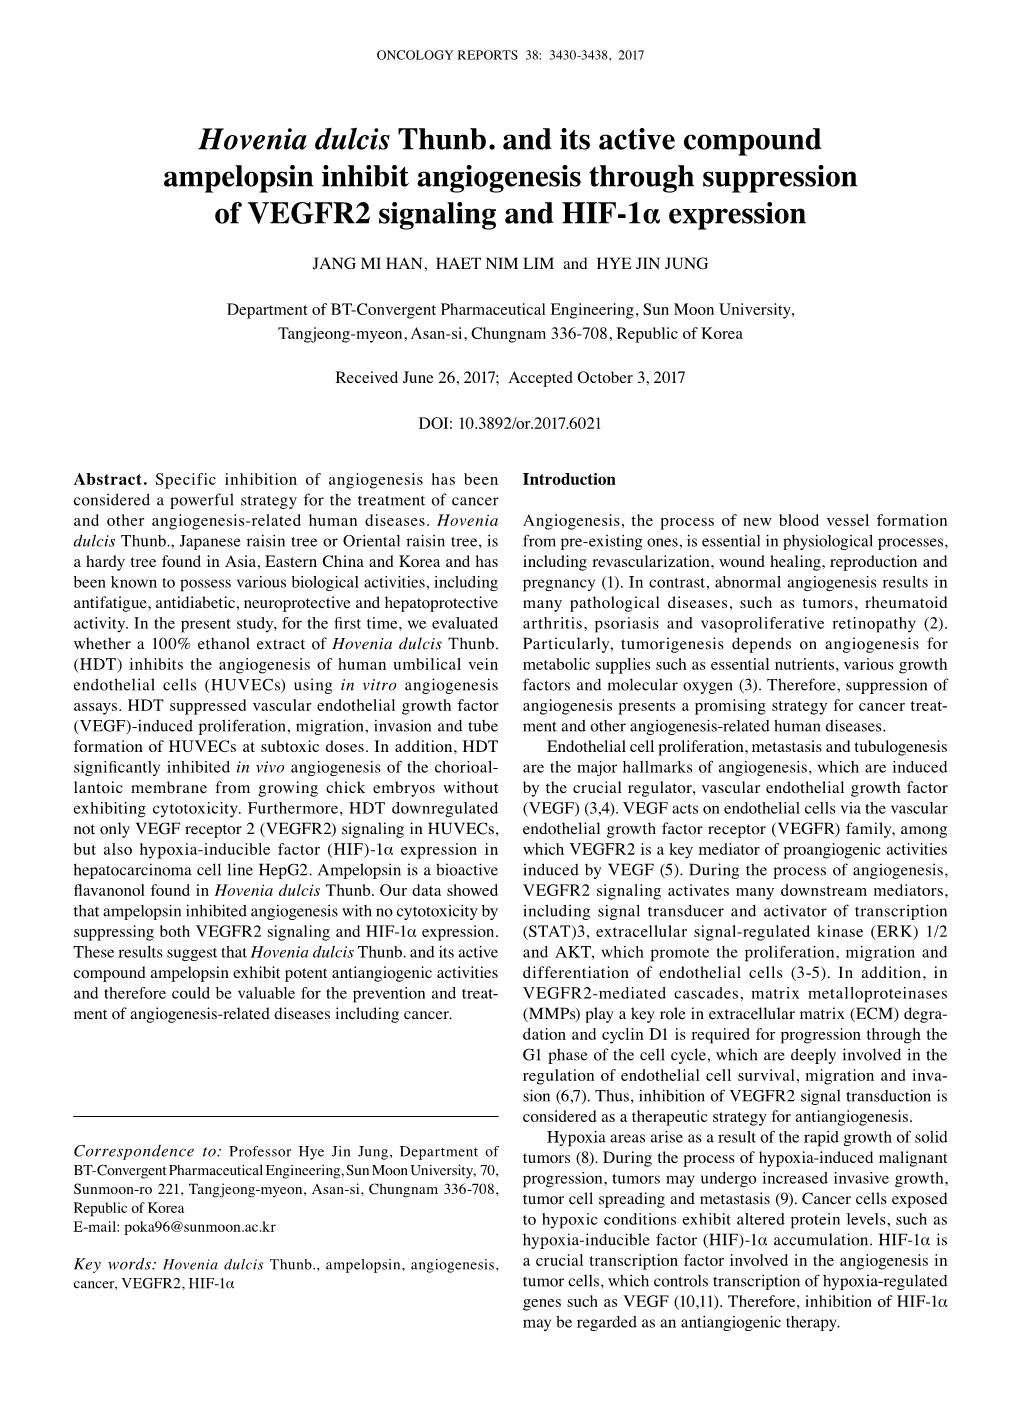 Hovenia Dulcis Thunb. and Its Active Compound Ampelopsin Inhibit Angiogenesis Through Suppression of VEGFR2 Signaling and HIF-1Α Expression